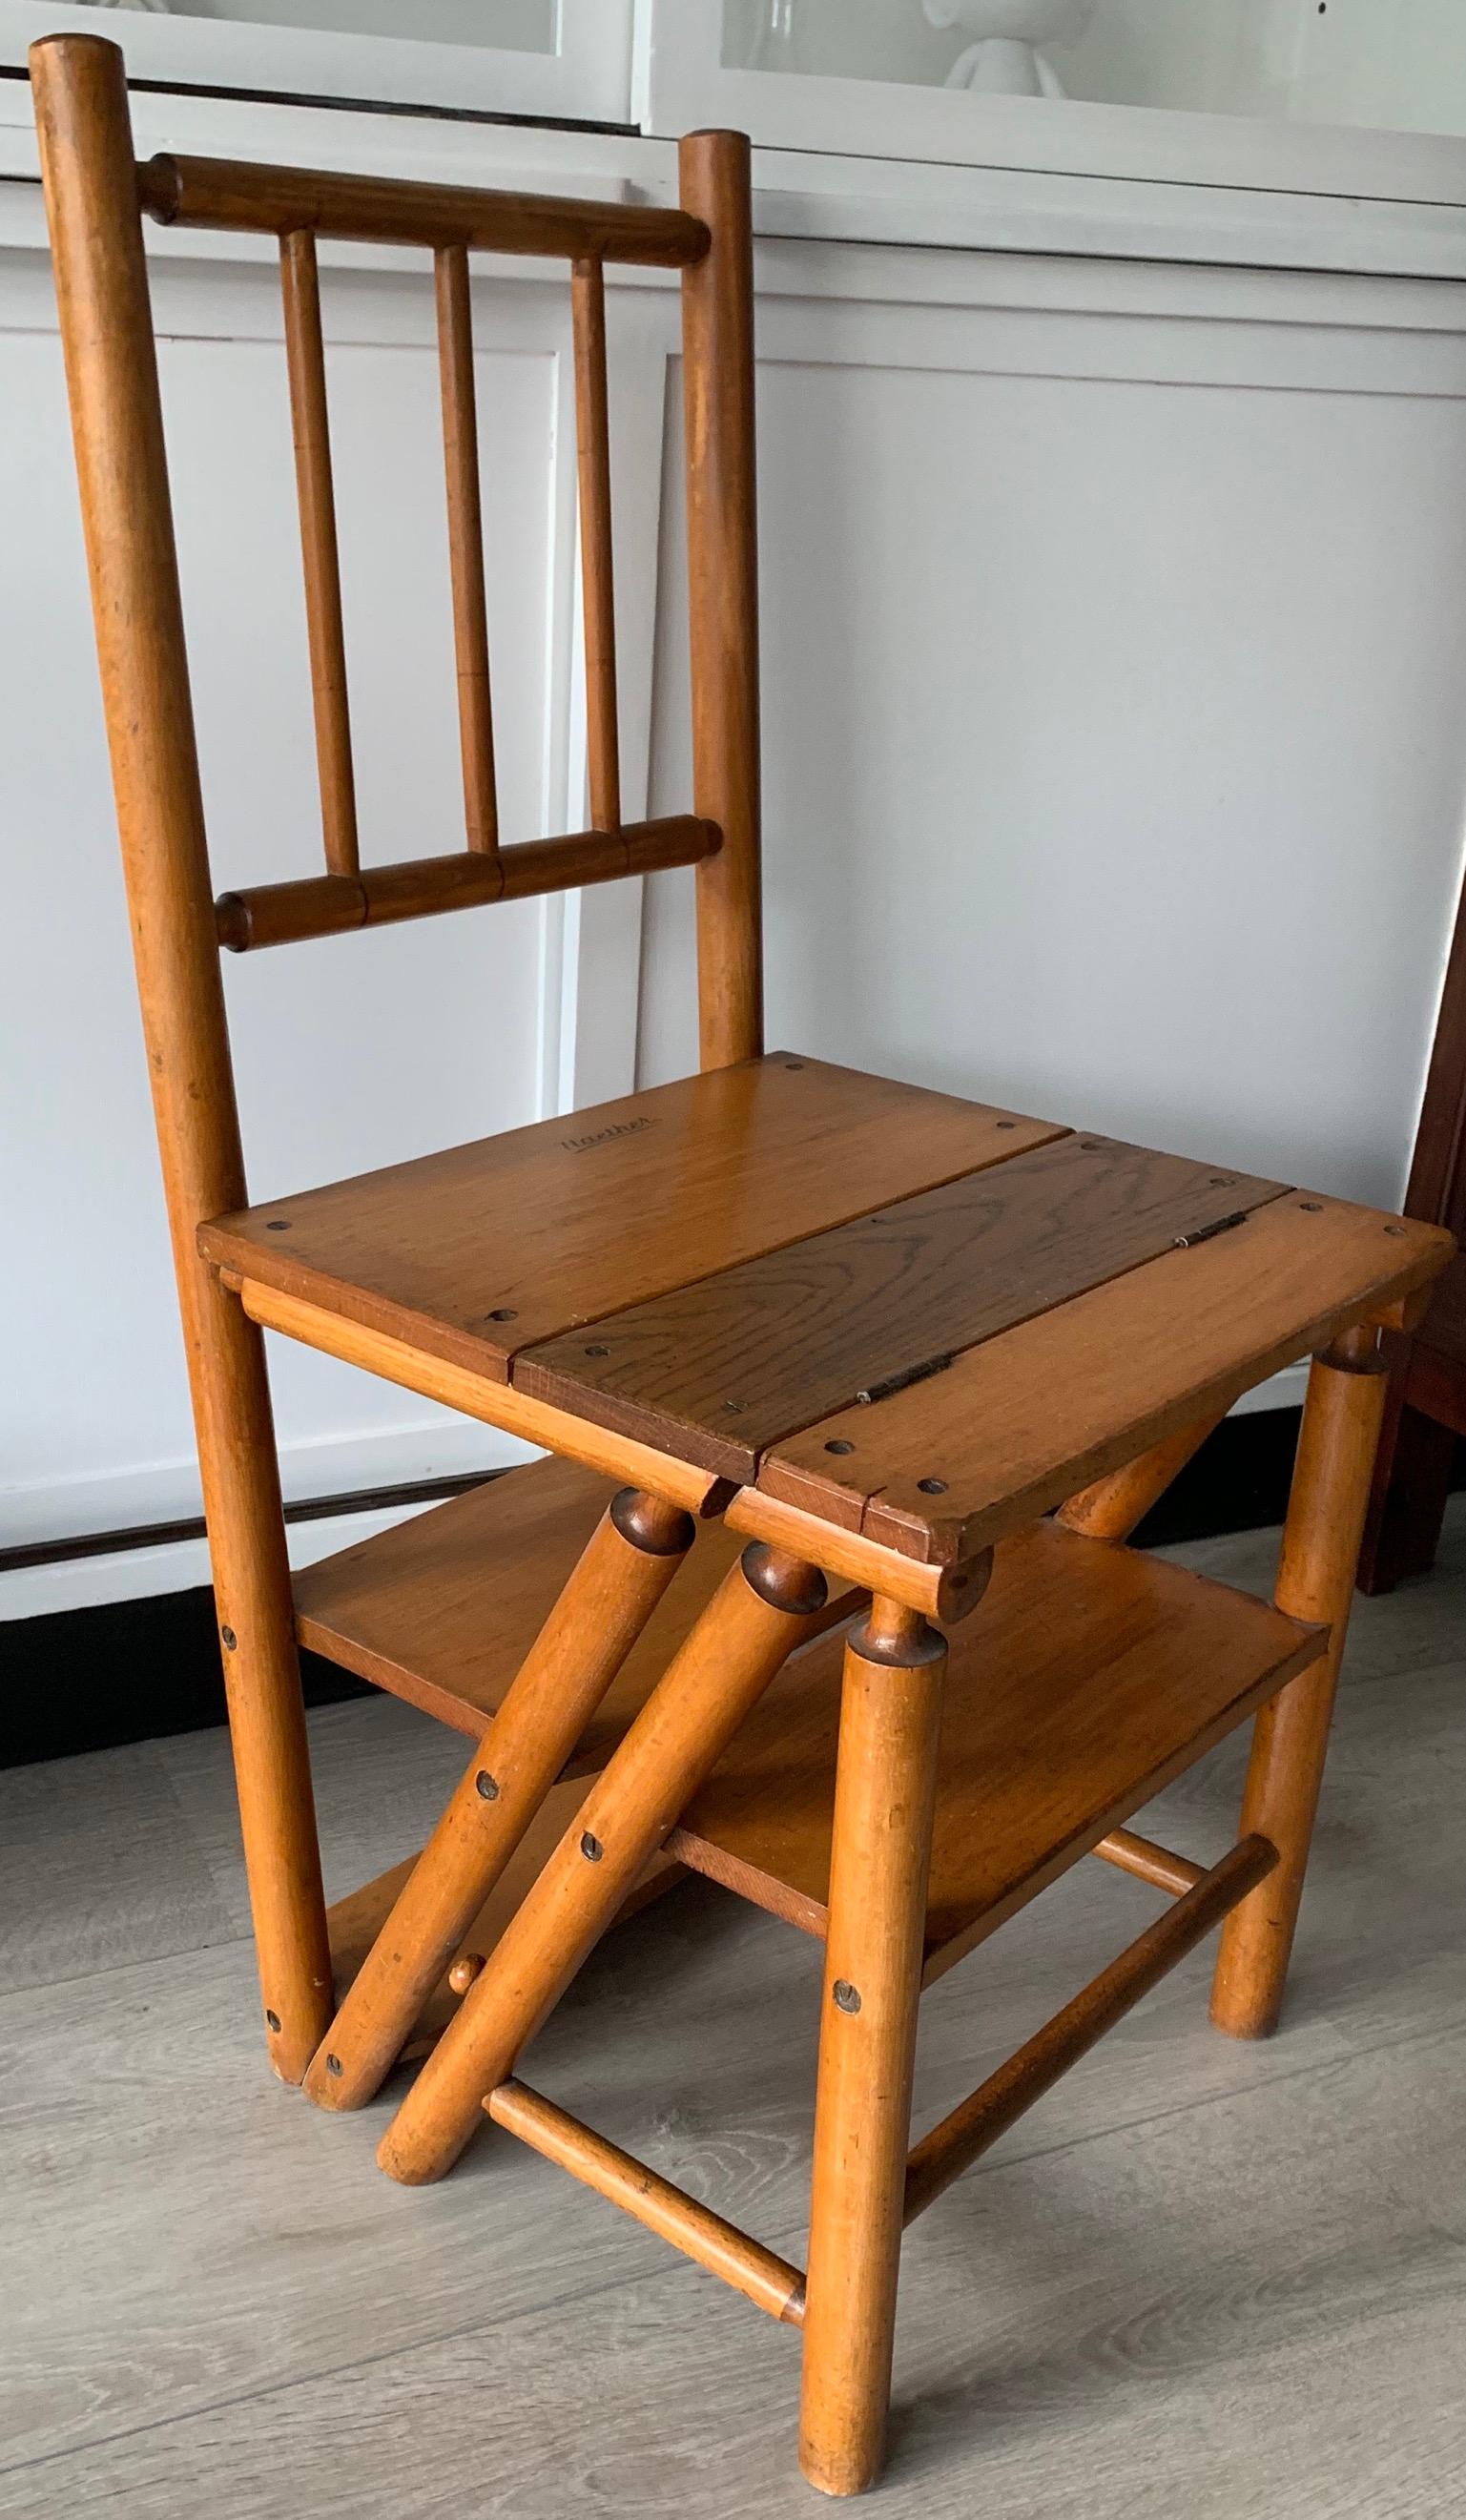 Rare and great quality, folding library chair and steps. 

The design of this Arts & Crafts library chair is an absolute joy to look at. Made in the early twentieth century by one of Germany's finest these stylish steps were made to last and last